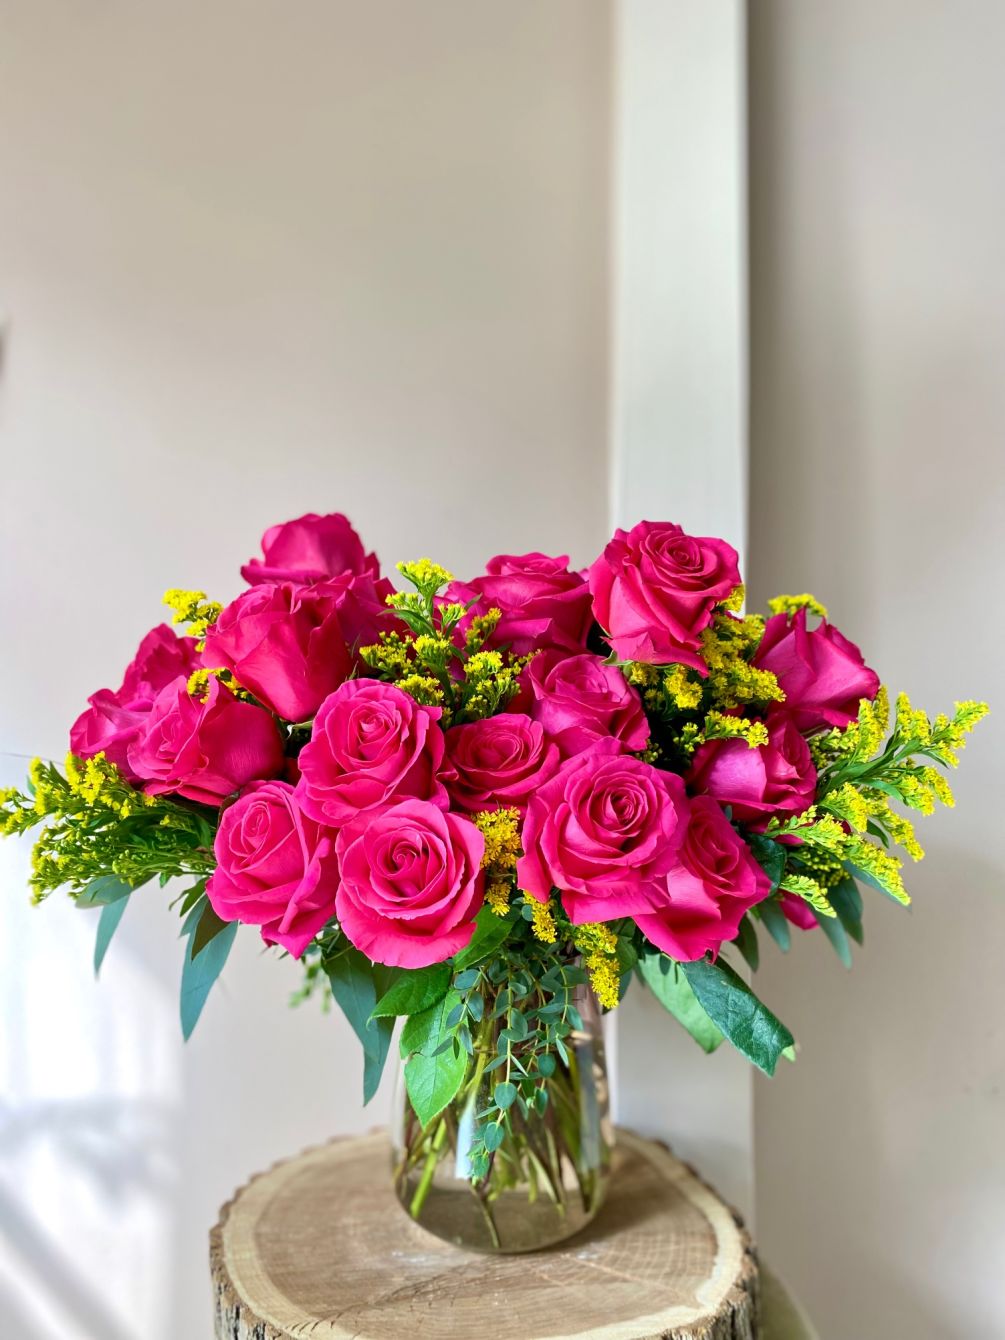 Gorgeous pink rose arrangement (Standard: 18, Deluxe: 24, Premium: 36) accented with